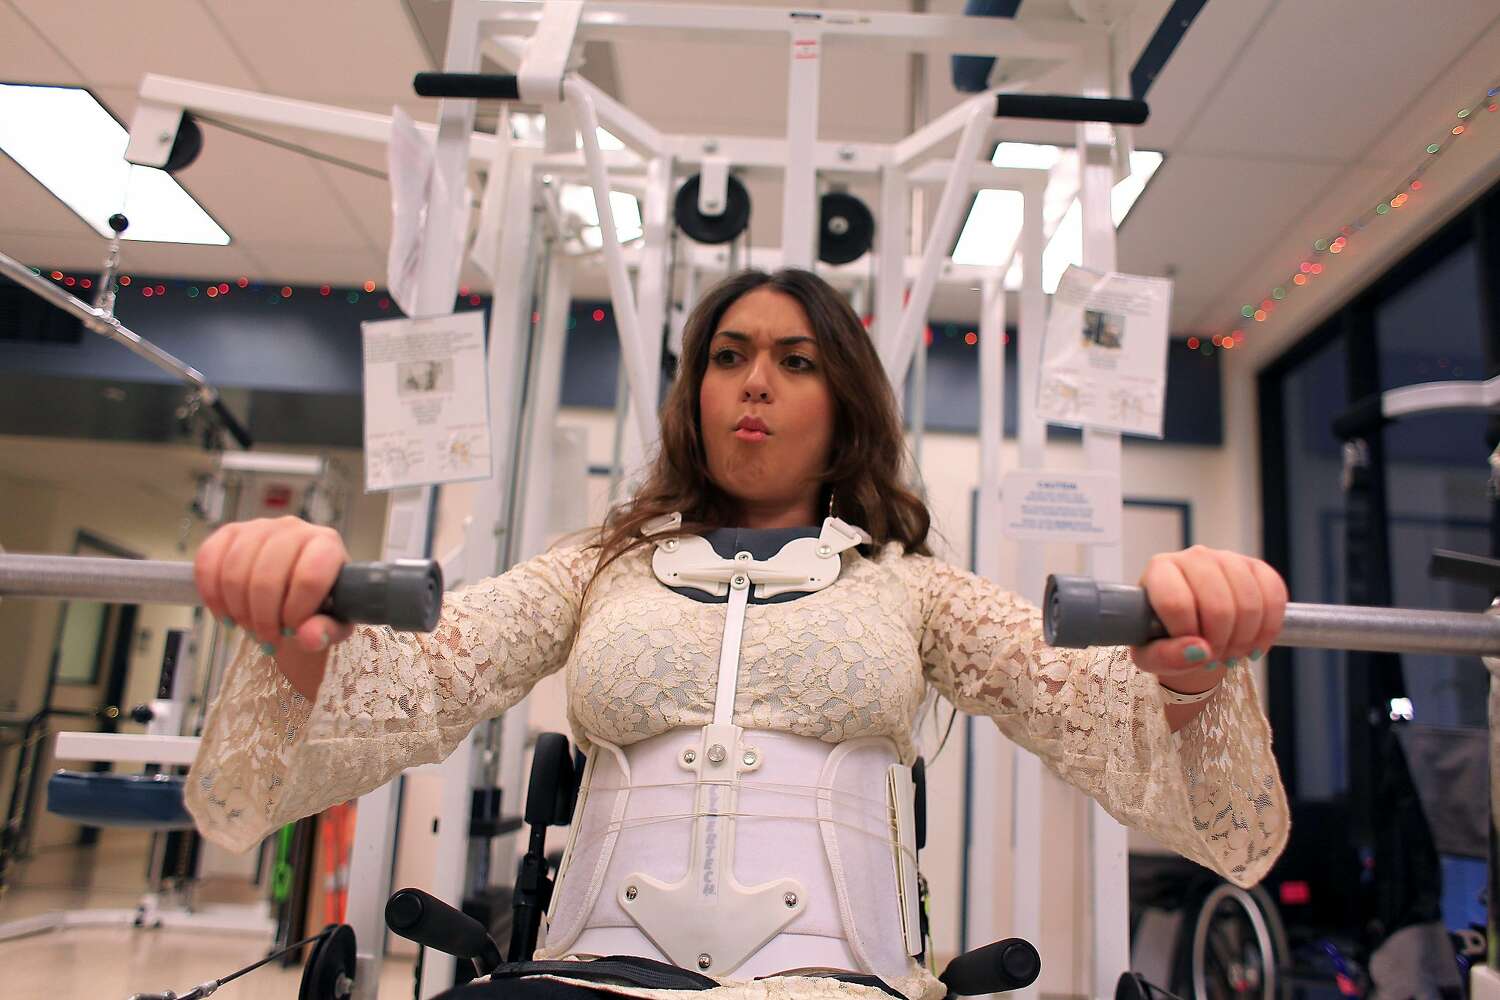 Katie Sharify does physical therapy in 2011.